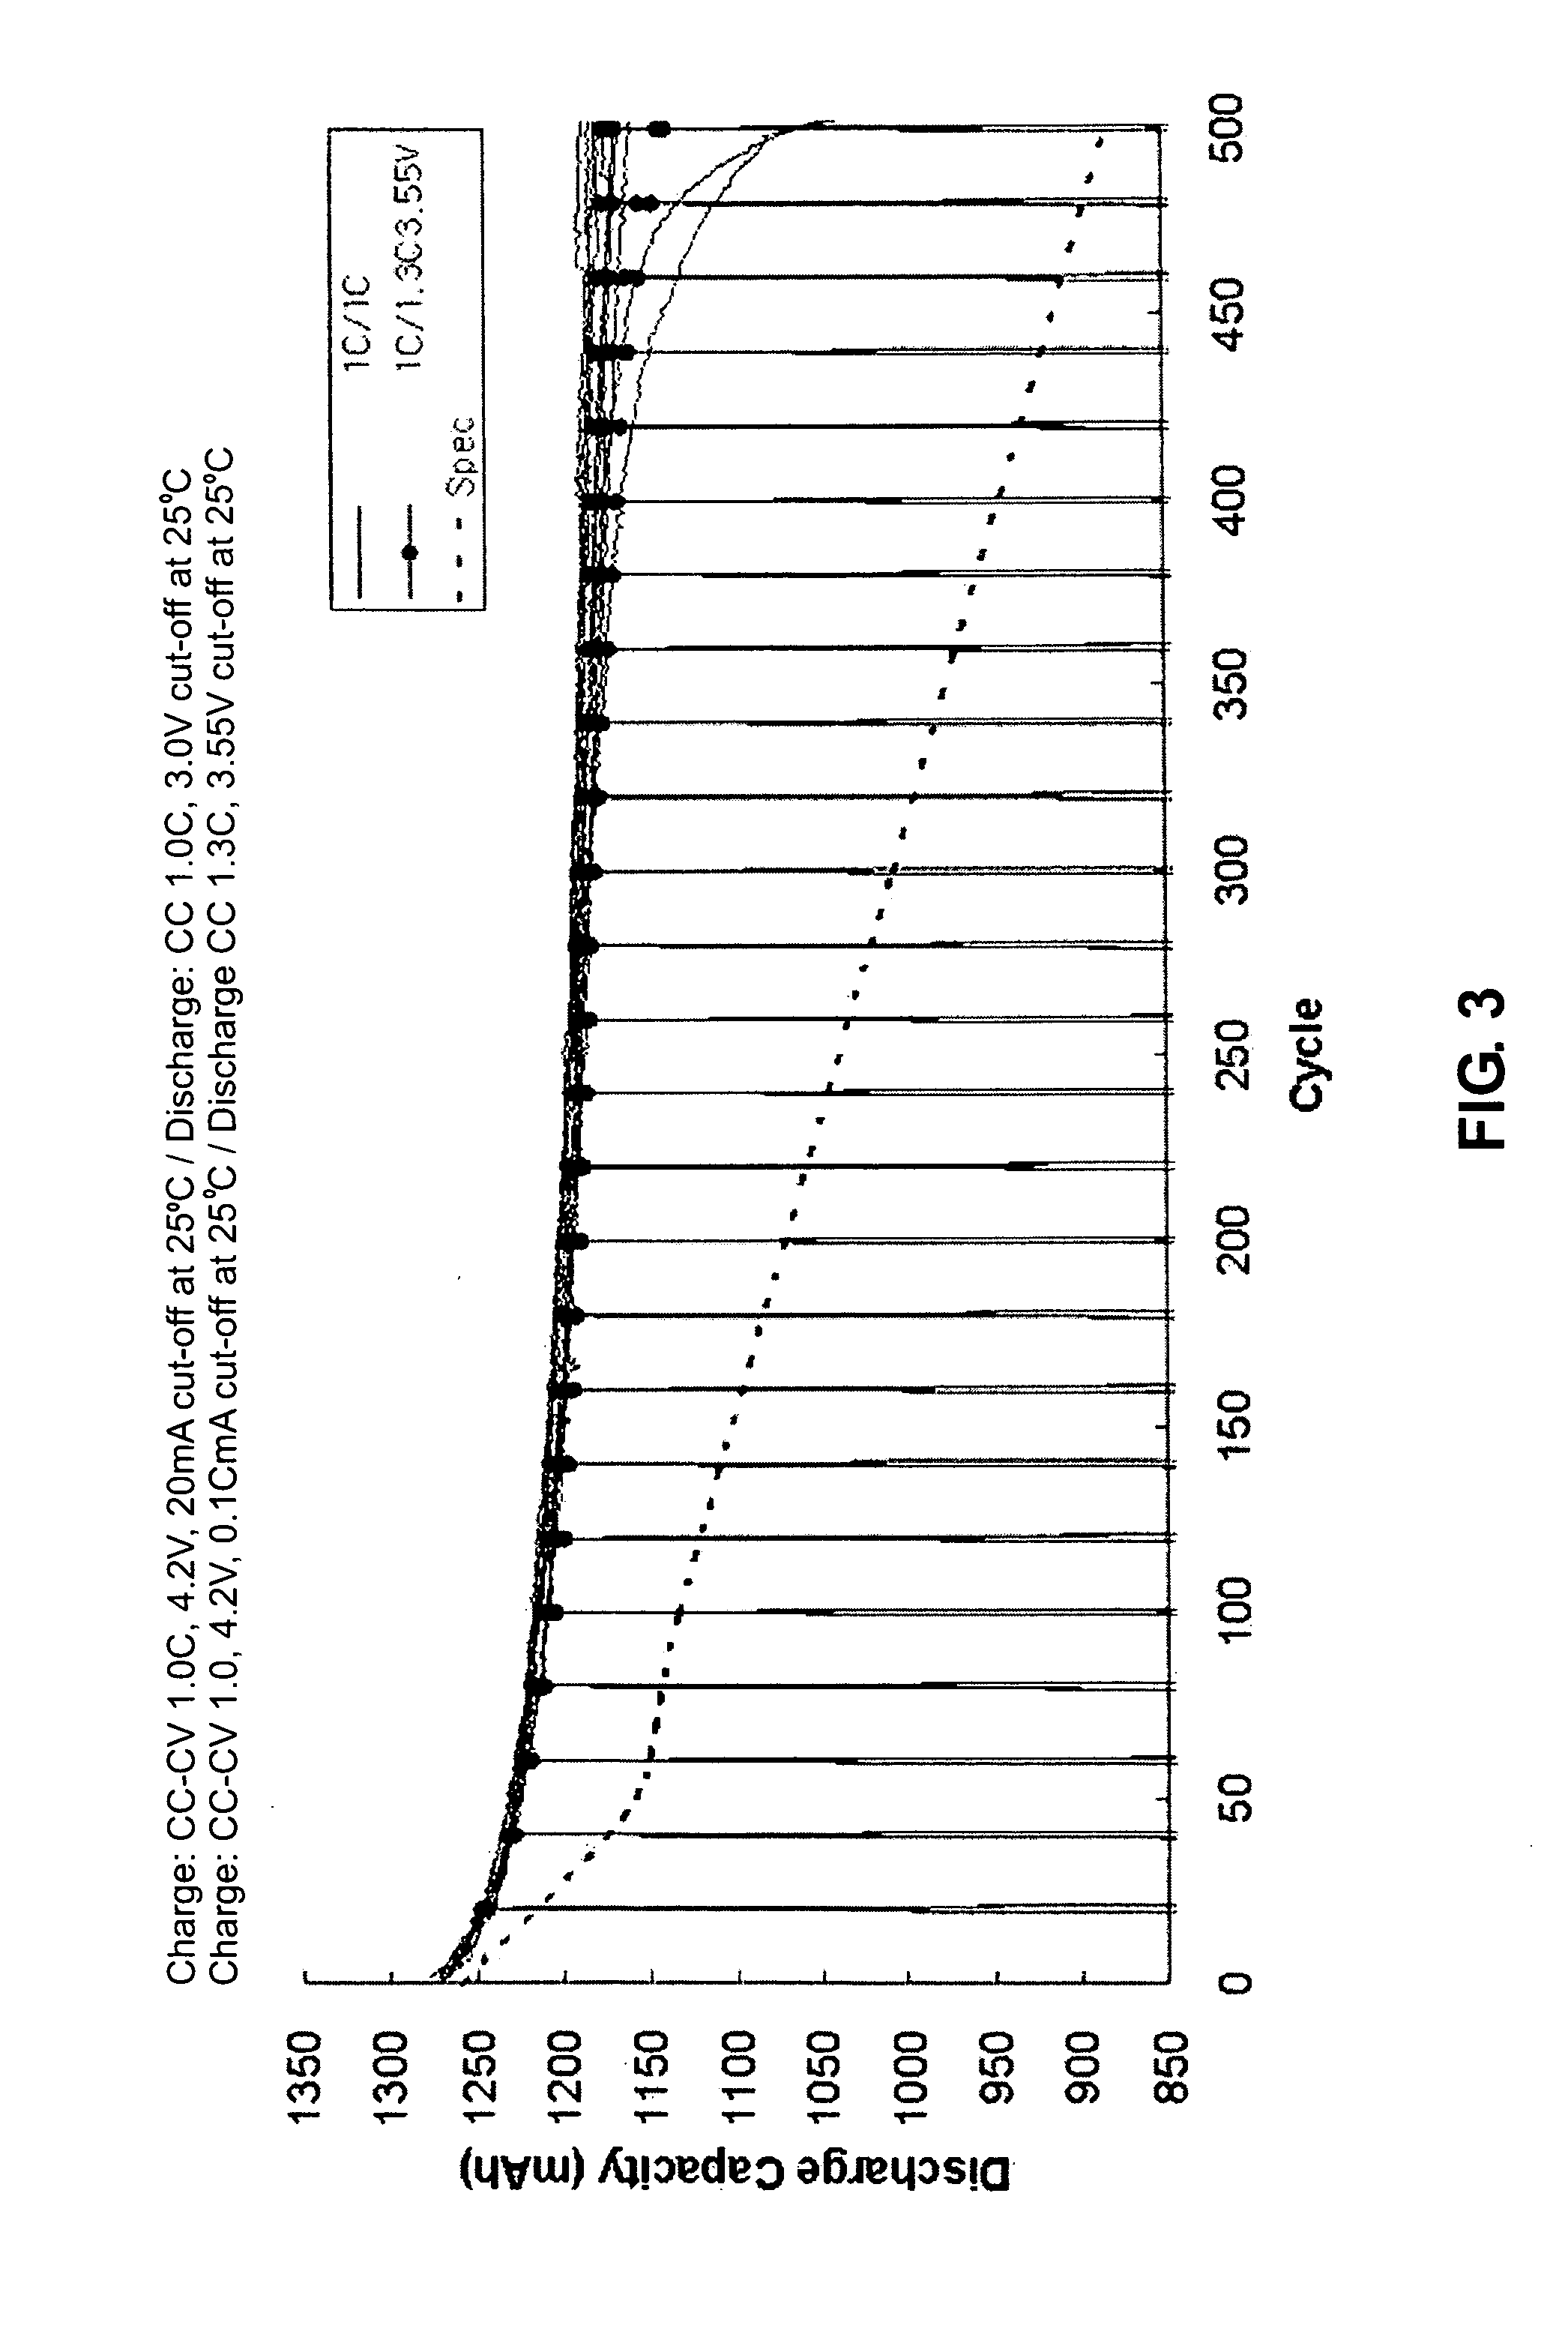 Method of testing cycle life of lithium rechargeable battery